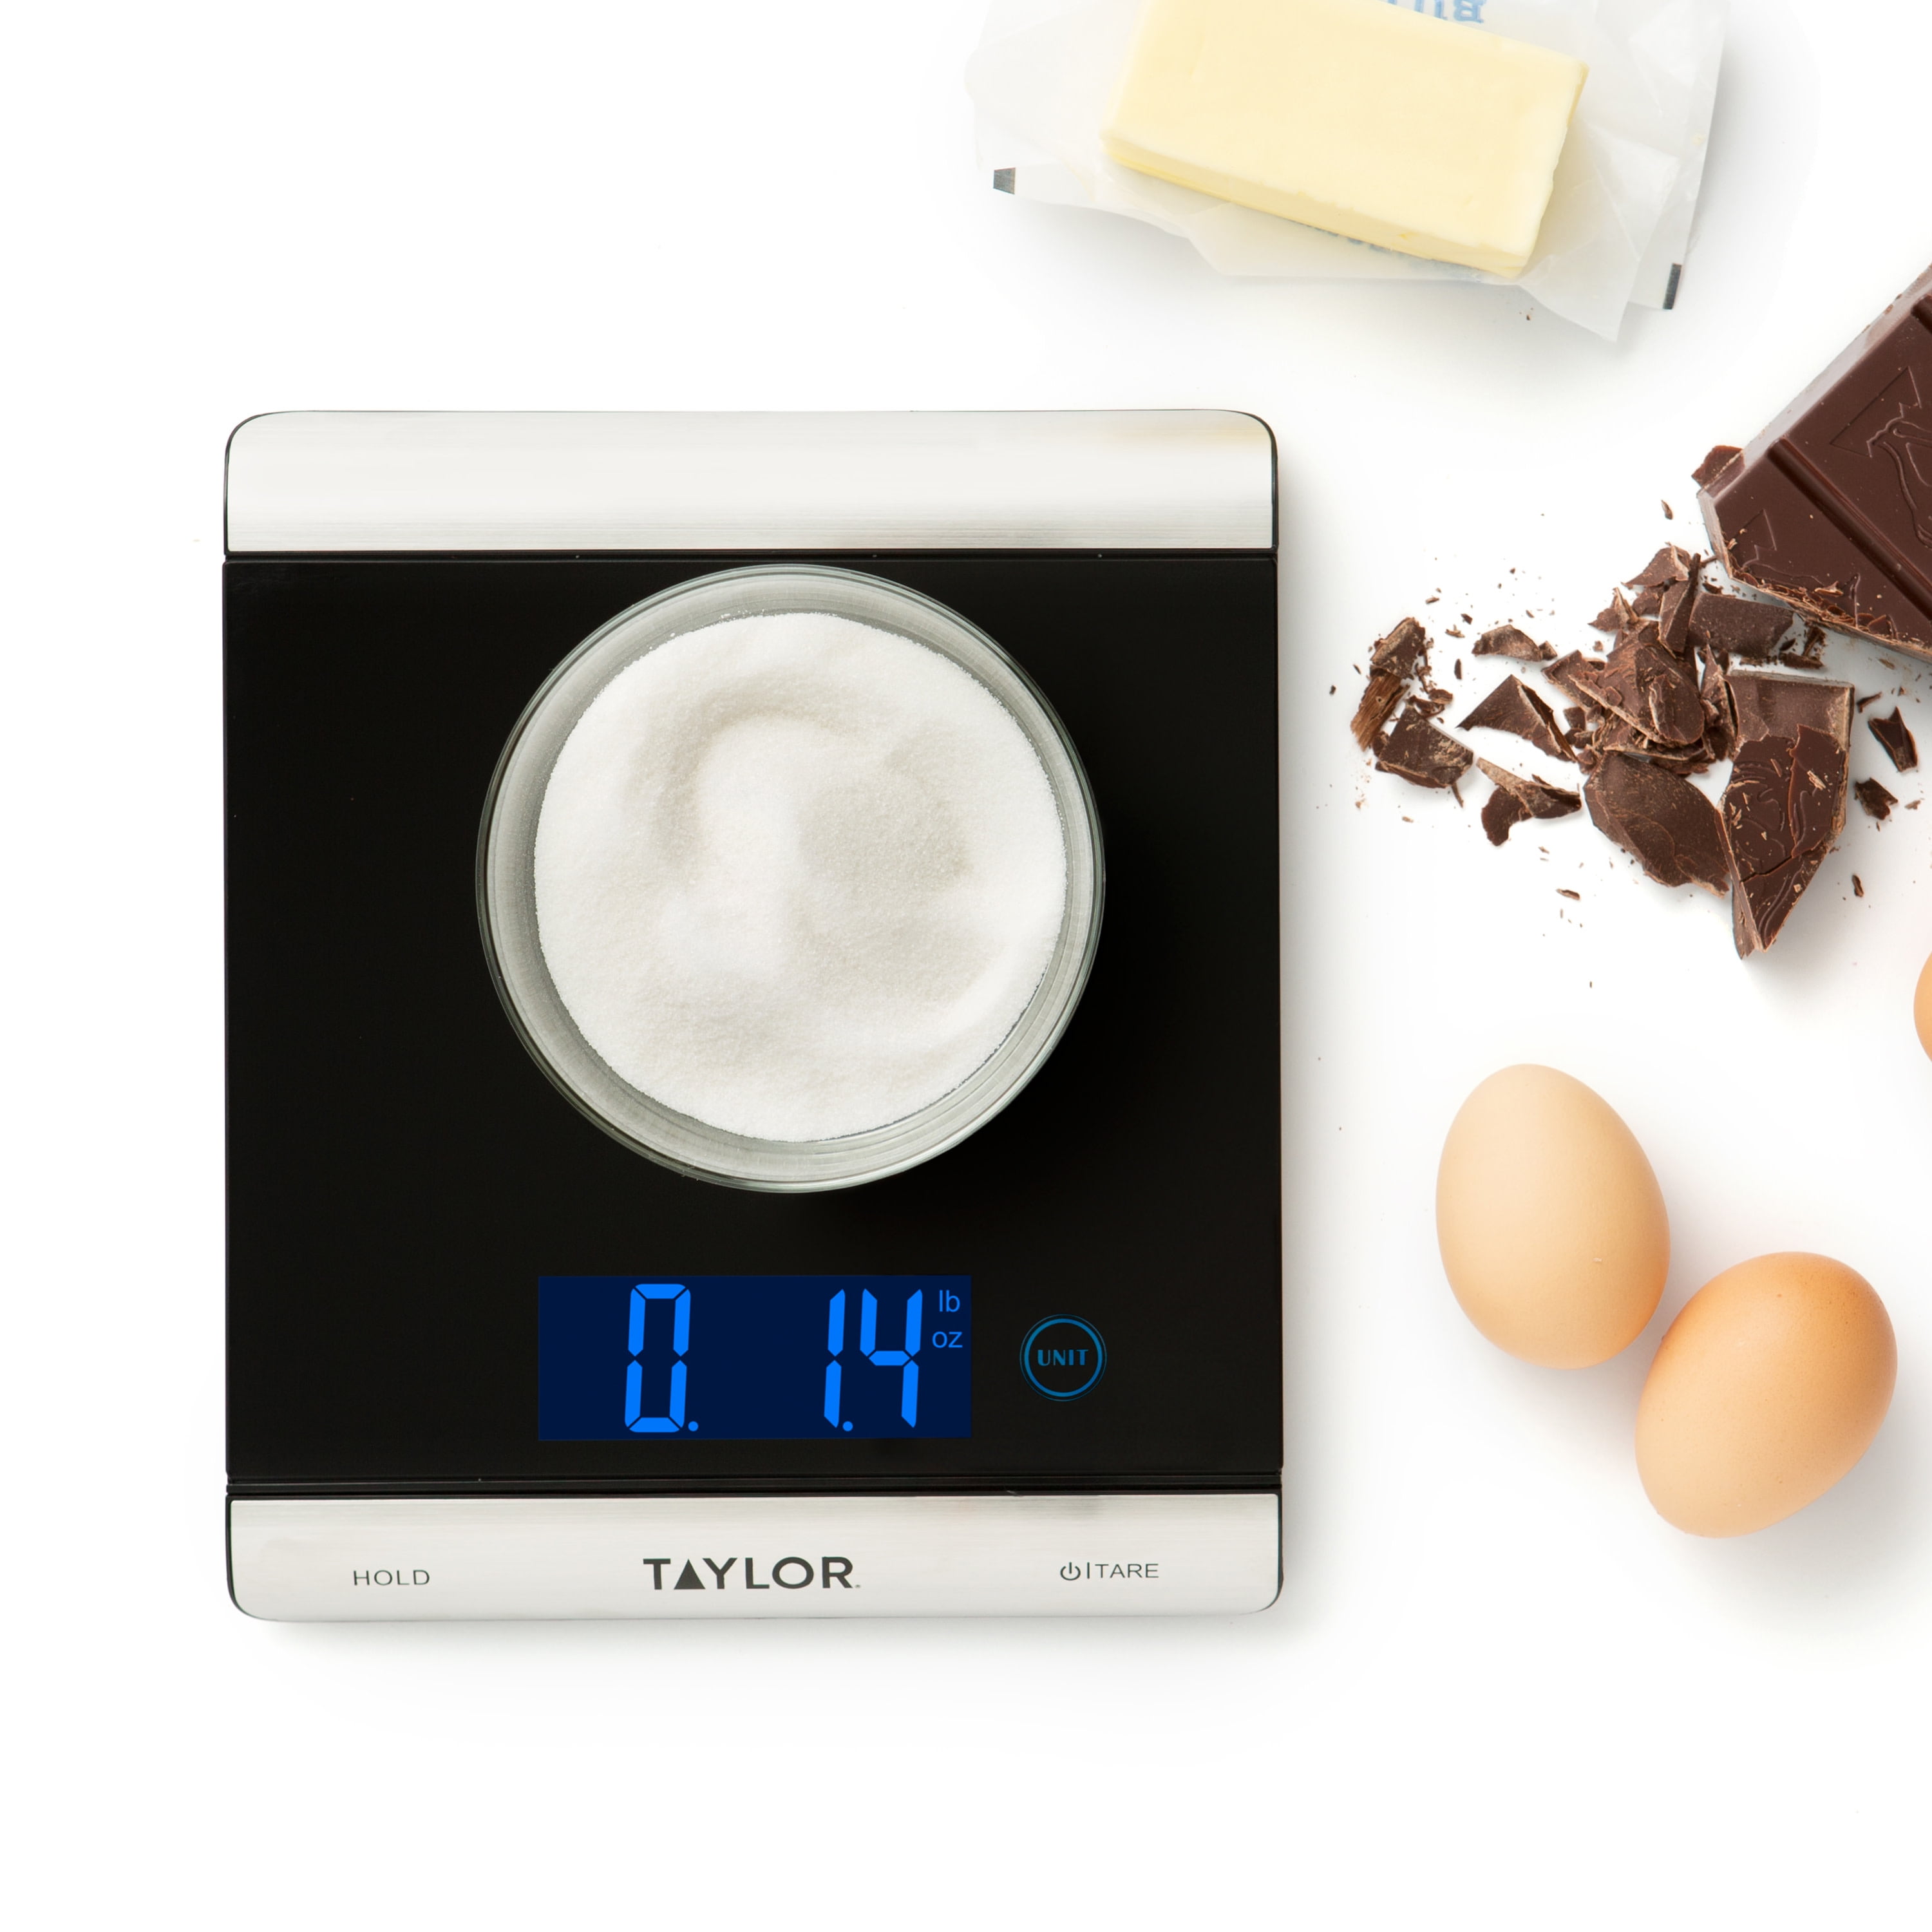 Taylor Ultra High Capacity Digital Kitchen Scale - On Sale - Bed